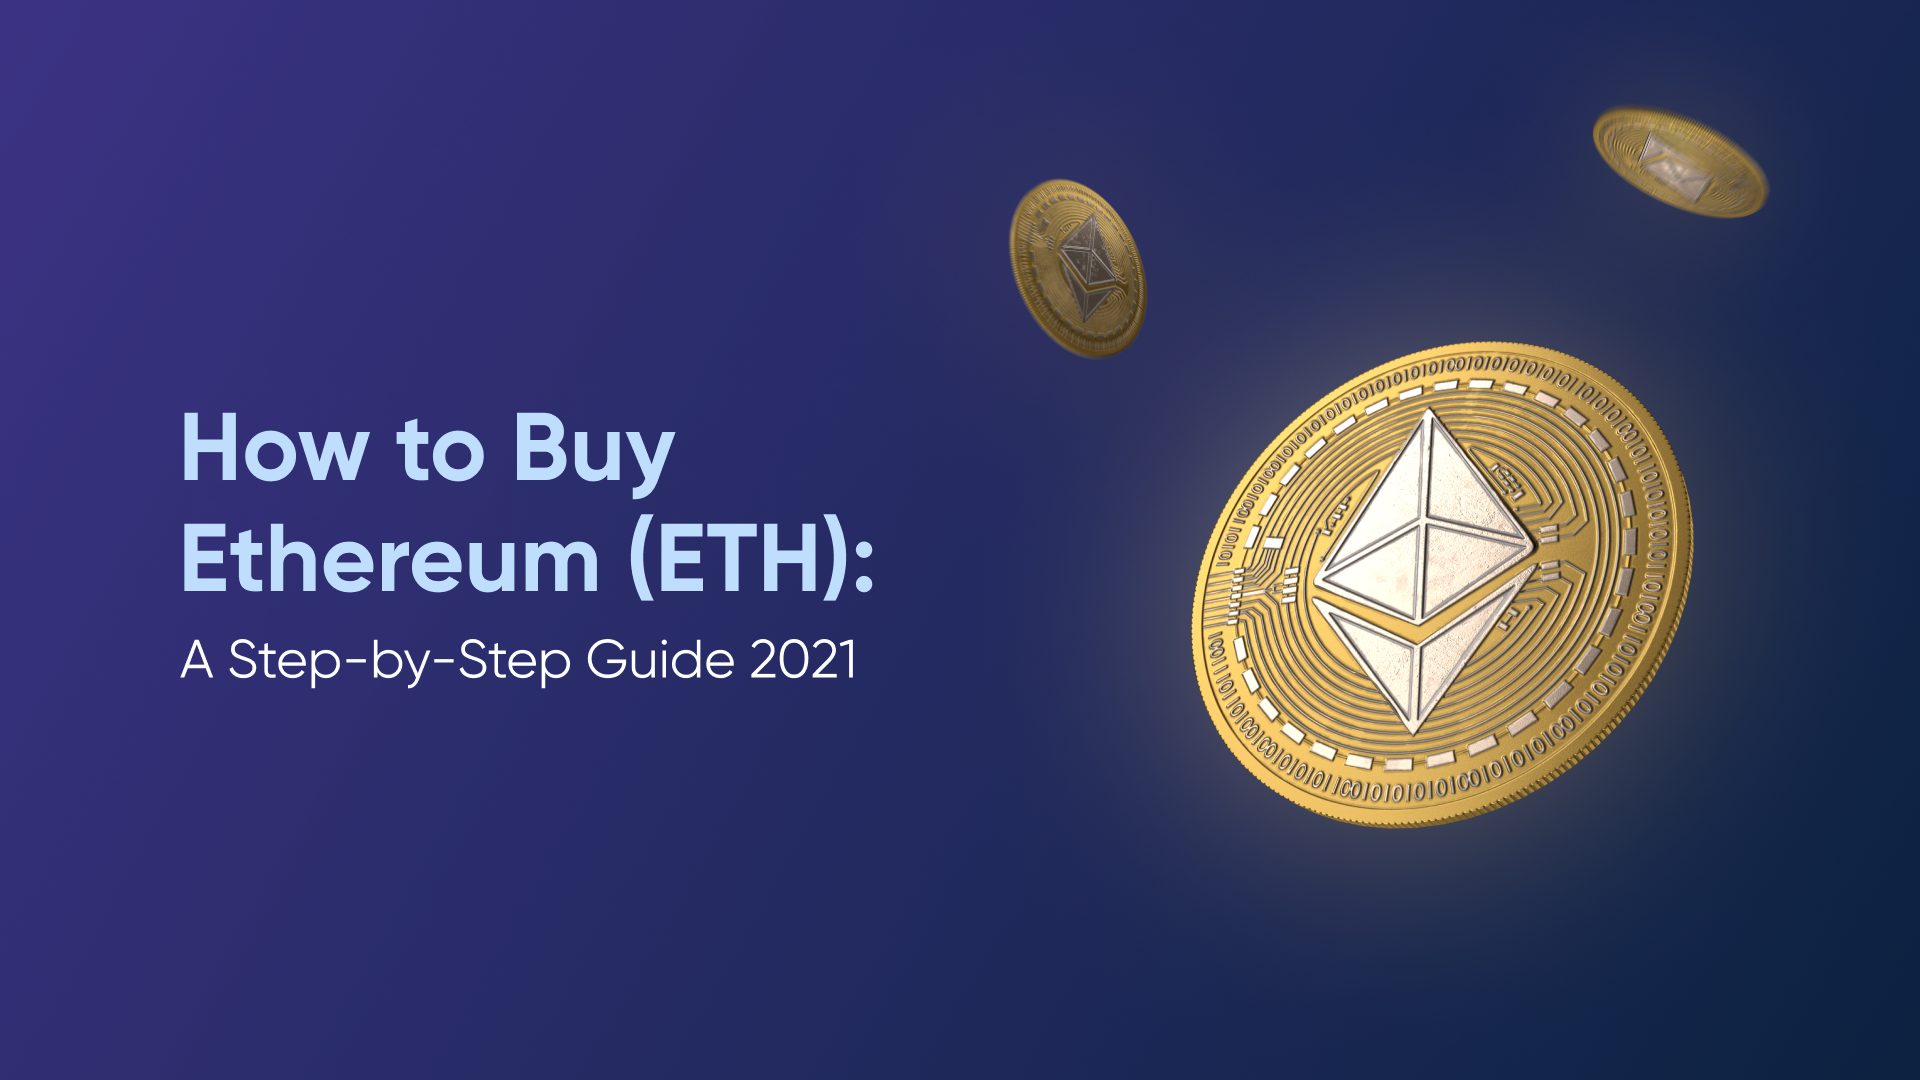 what company can i buy ethereum from